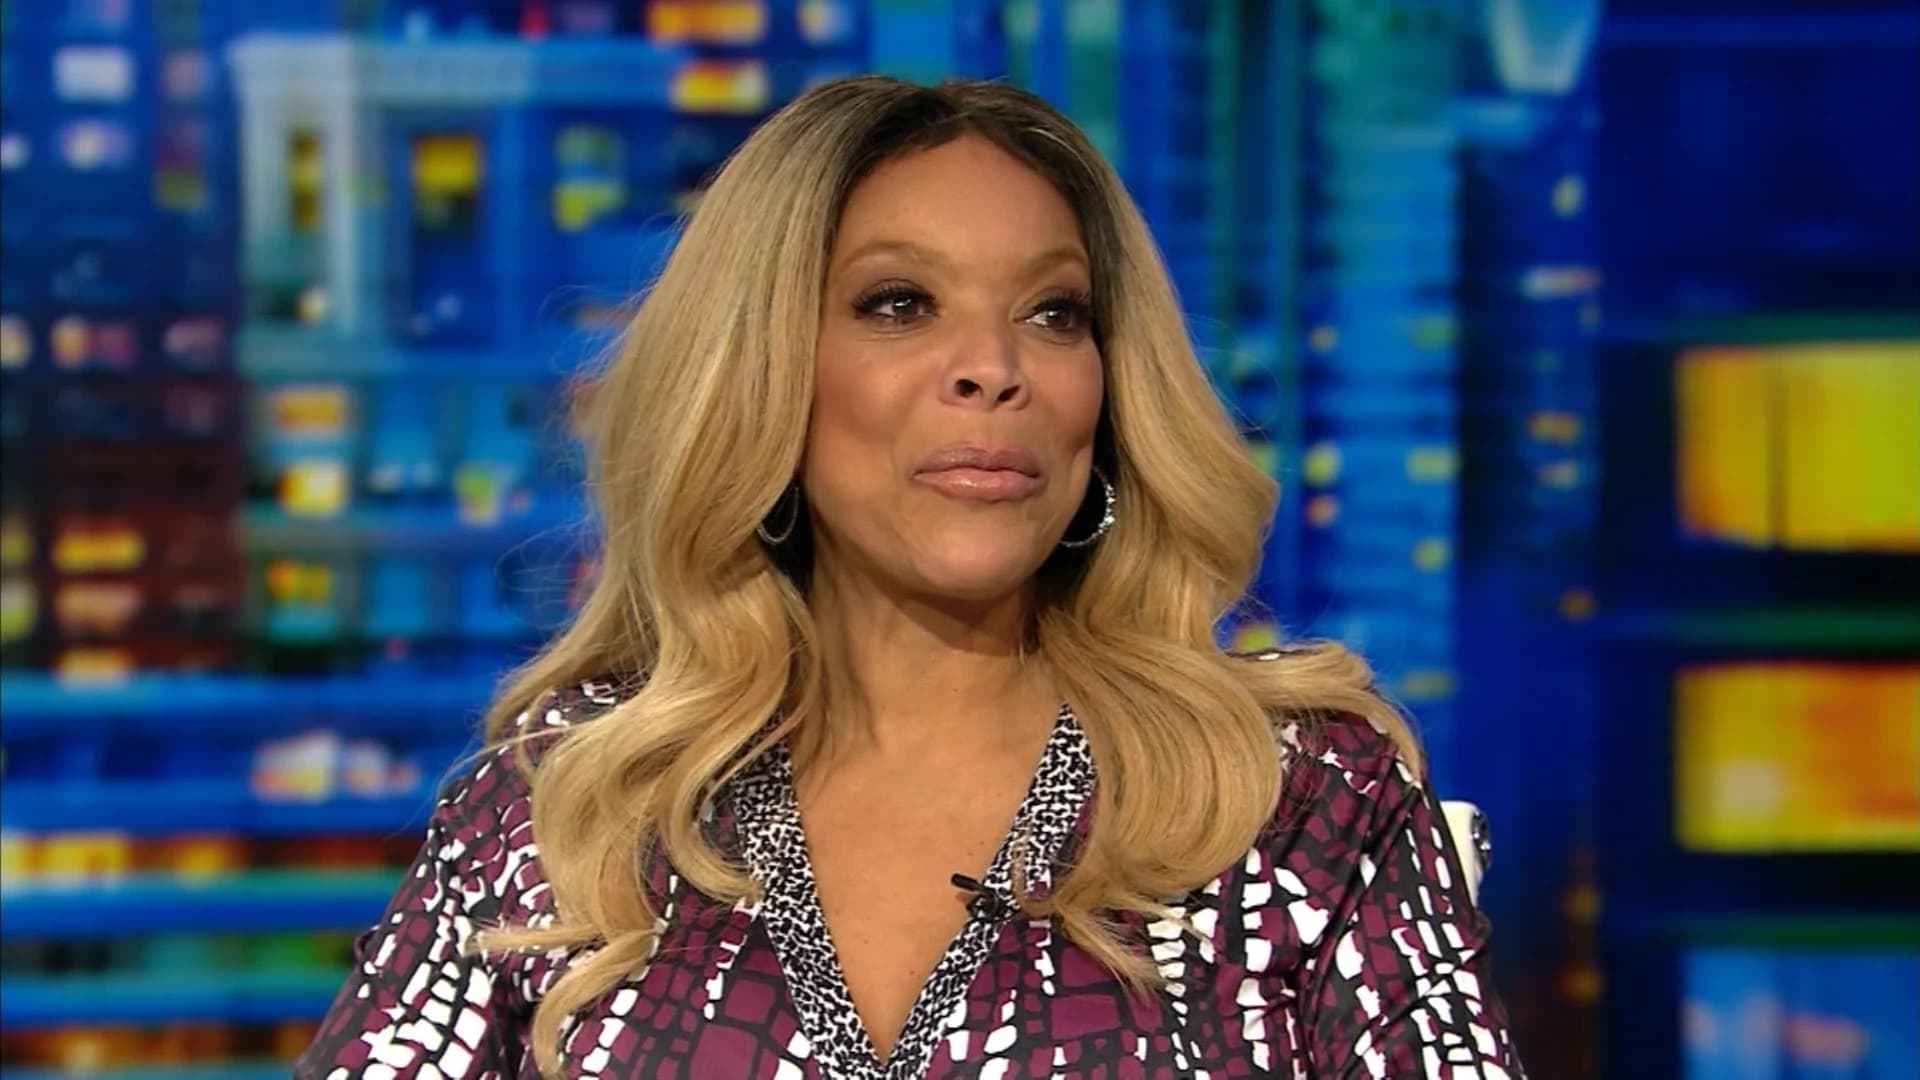 New Jersey native Wendy Williams reveals she is living in 'sober house'